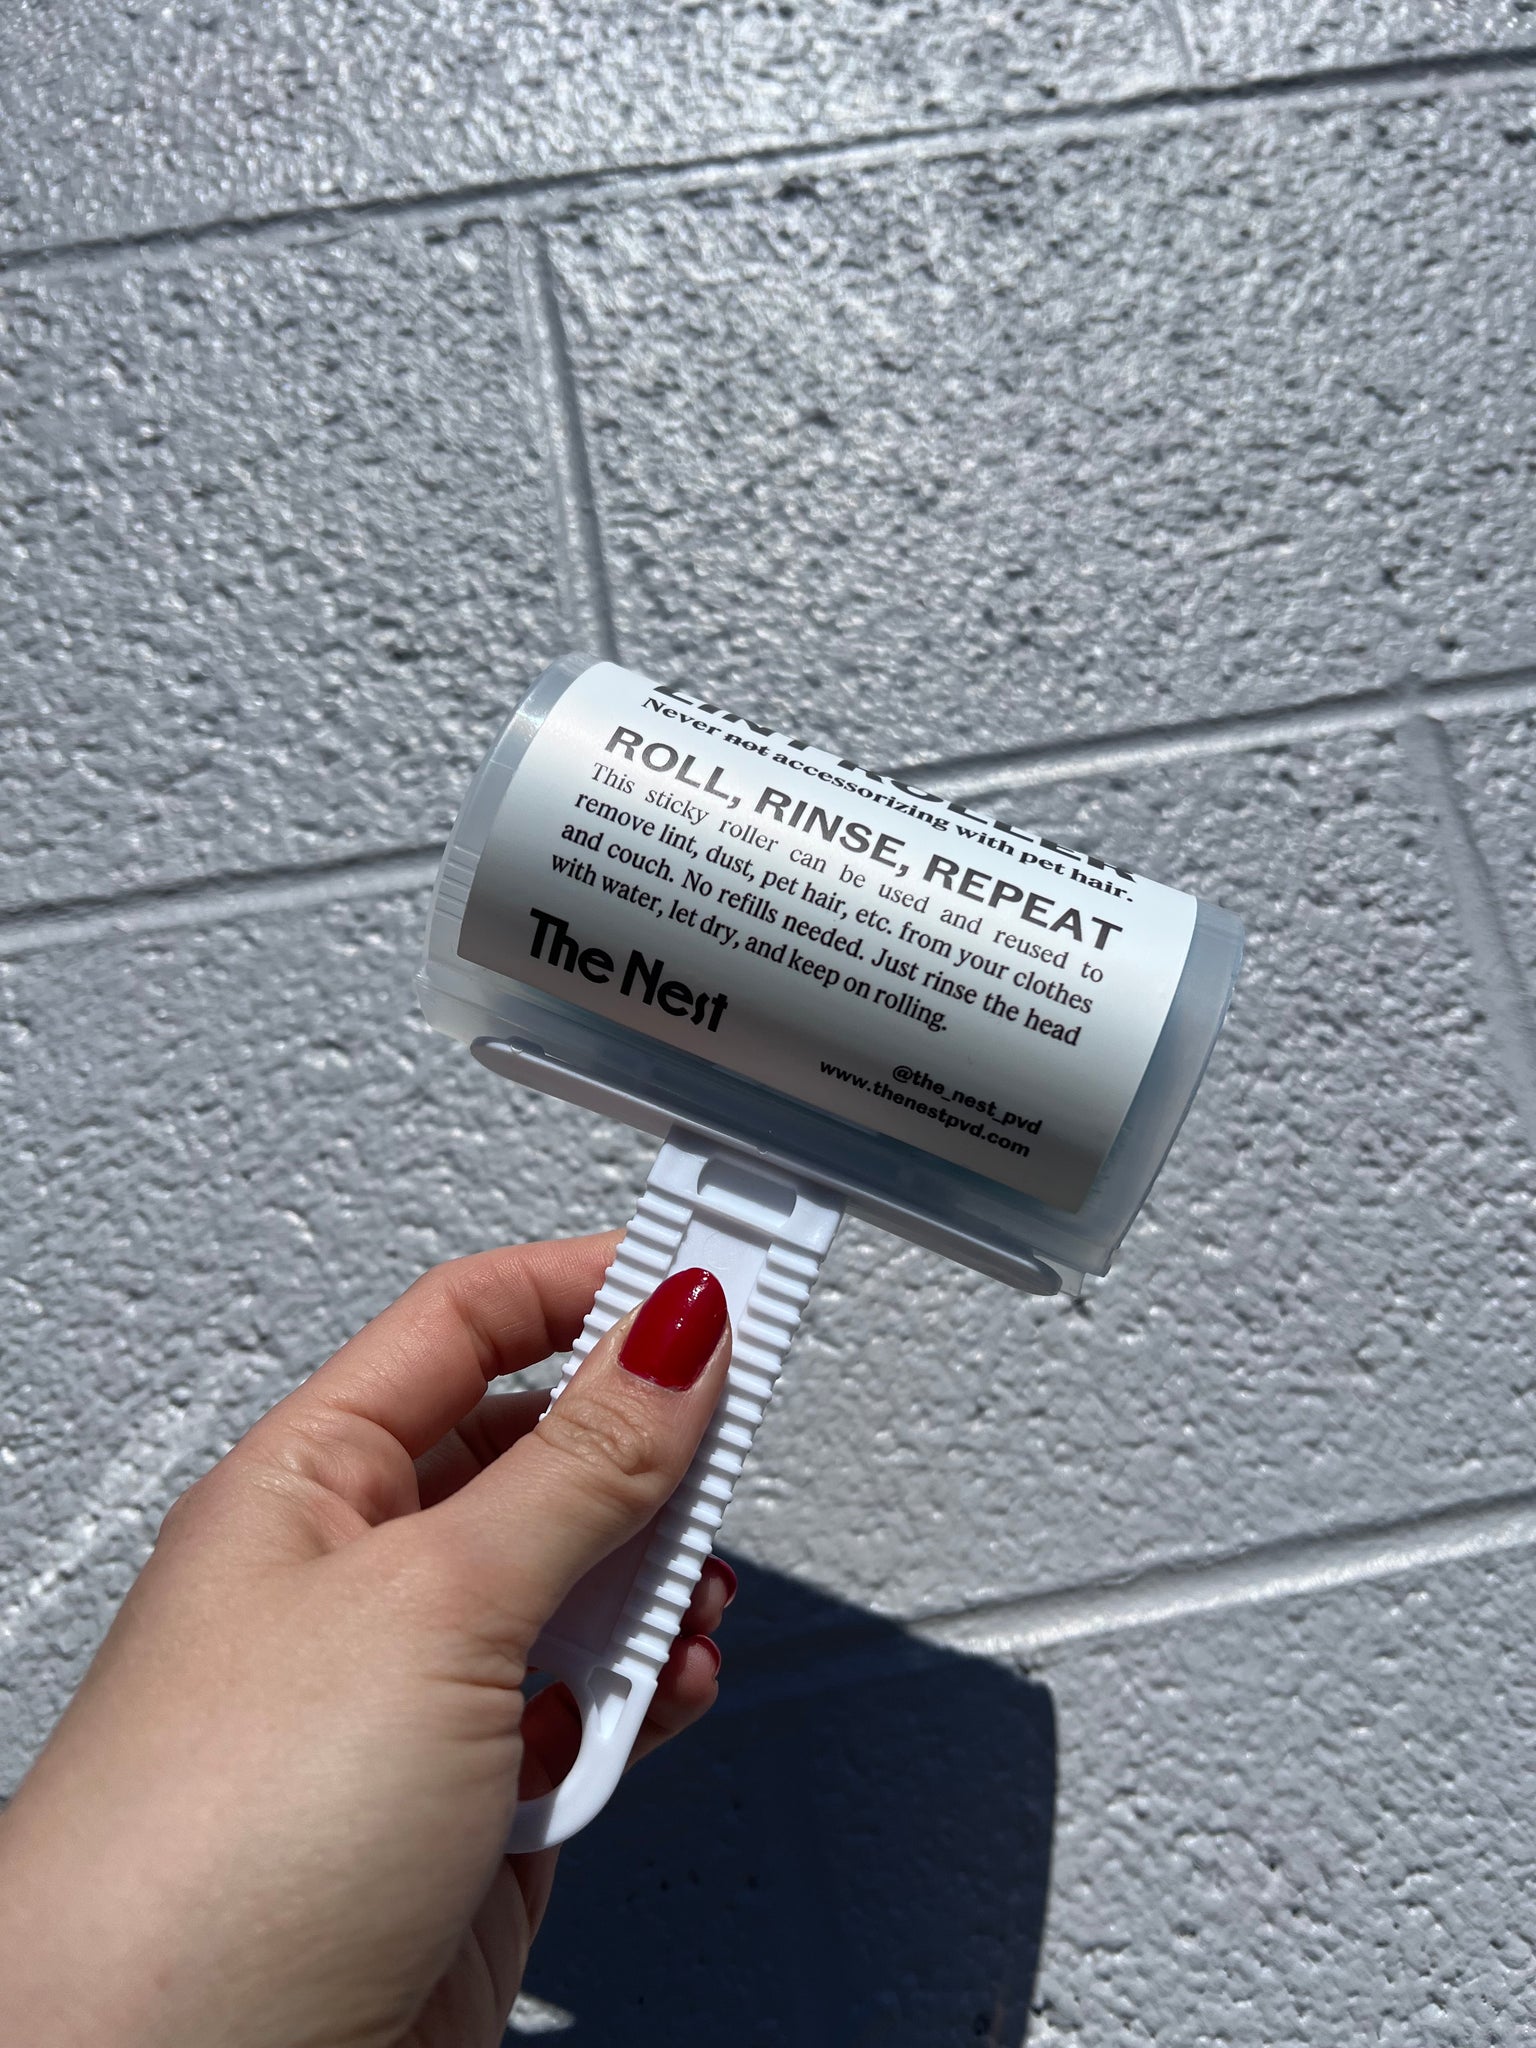 Reusable Washable Lint Roller - The Nest's Go To